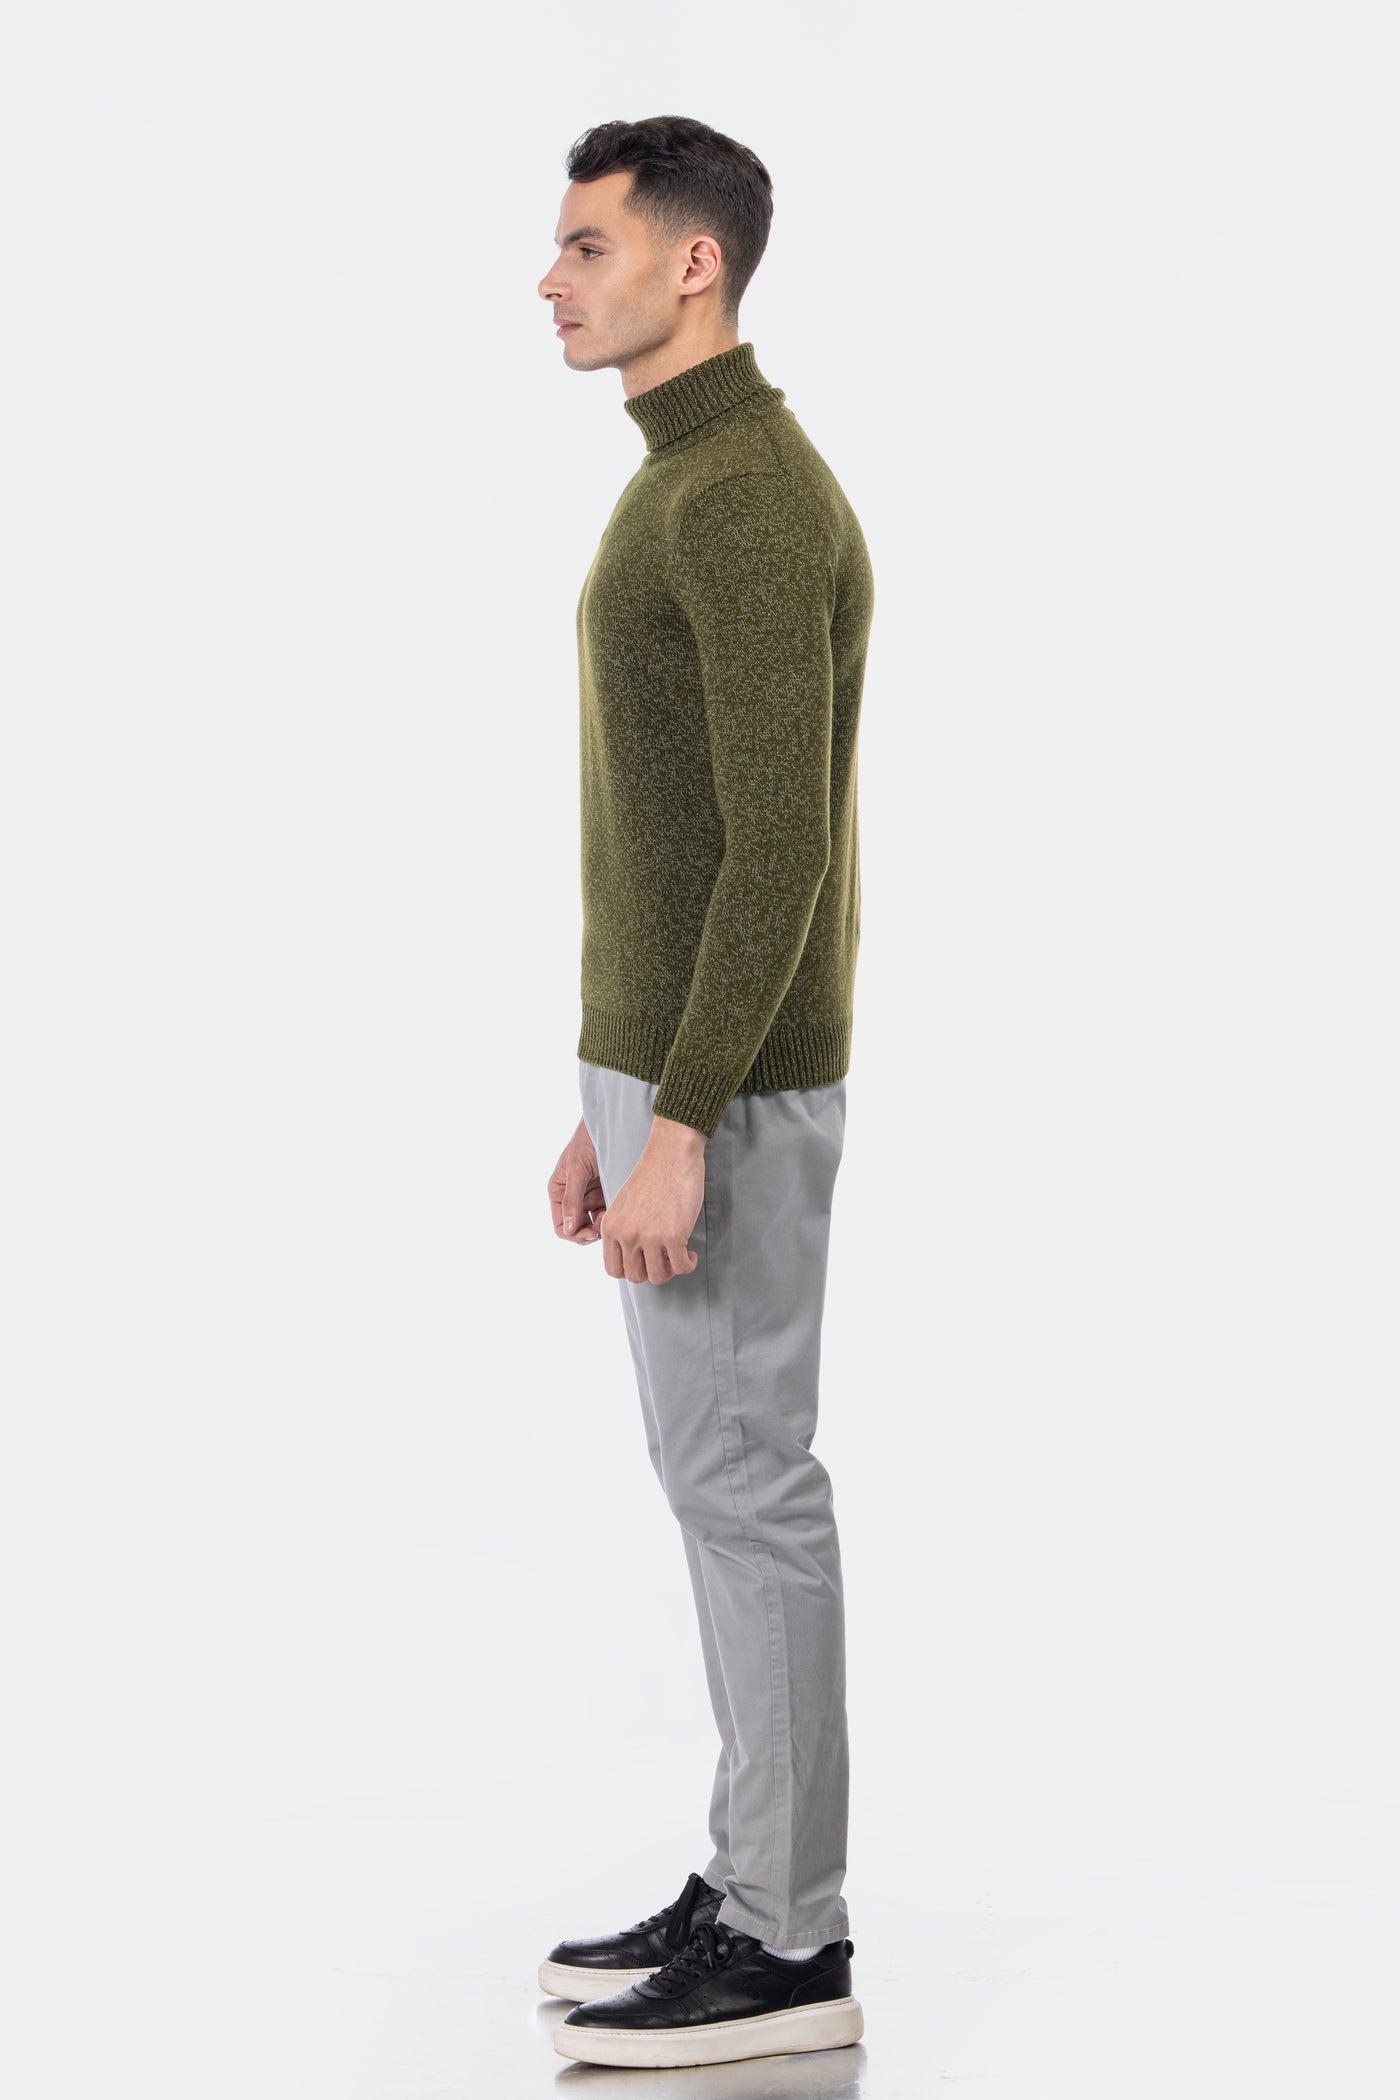 Jacquard Knitted Heavy Dark Green High-neck  Pullover